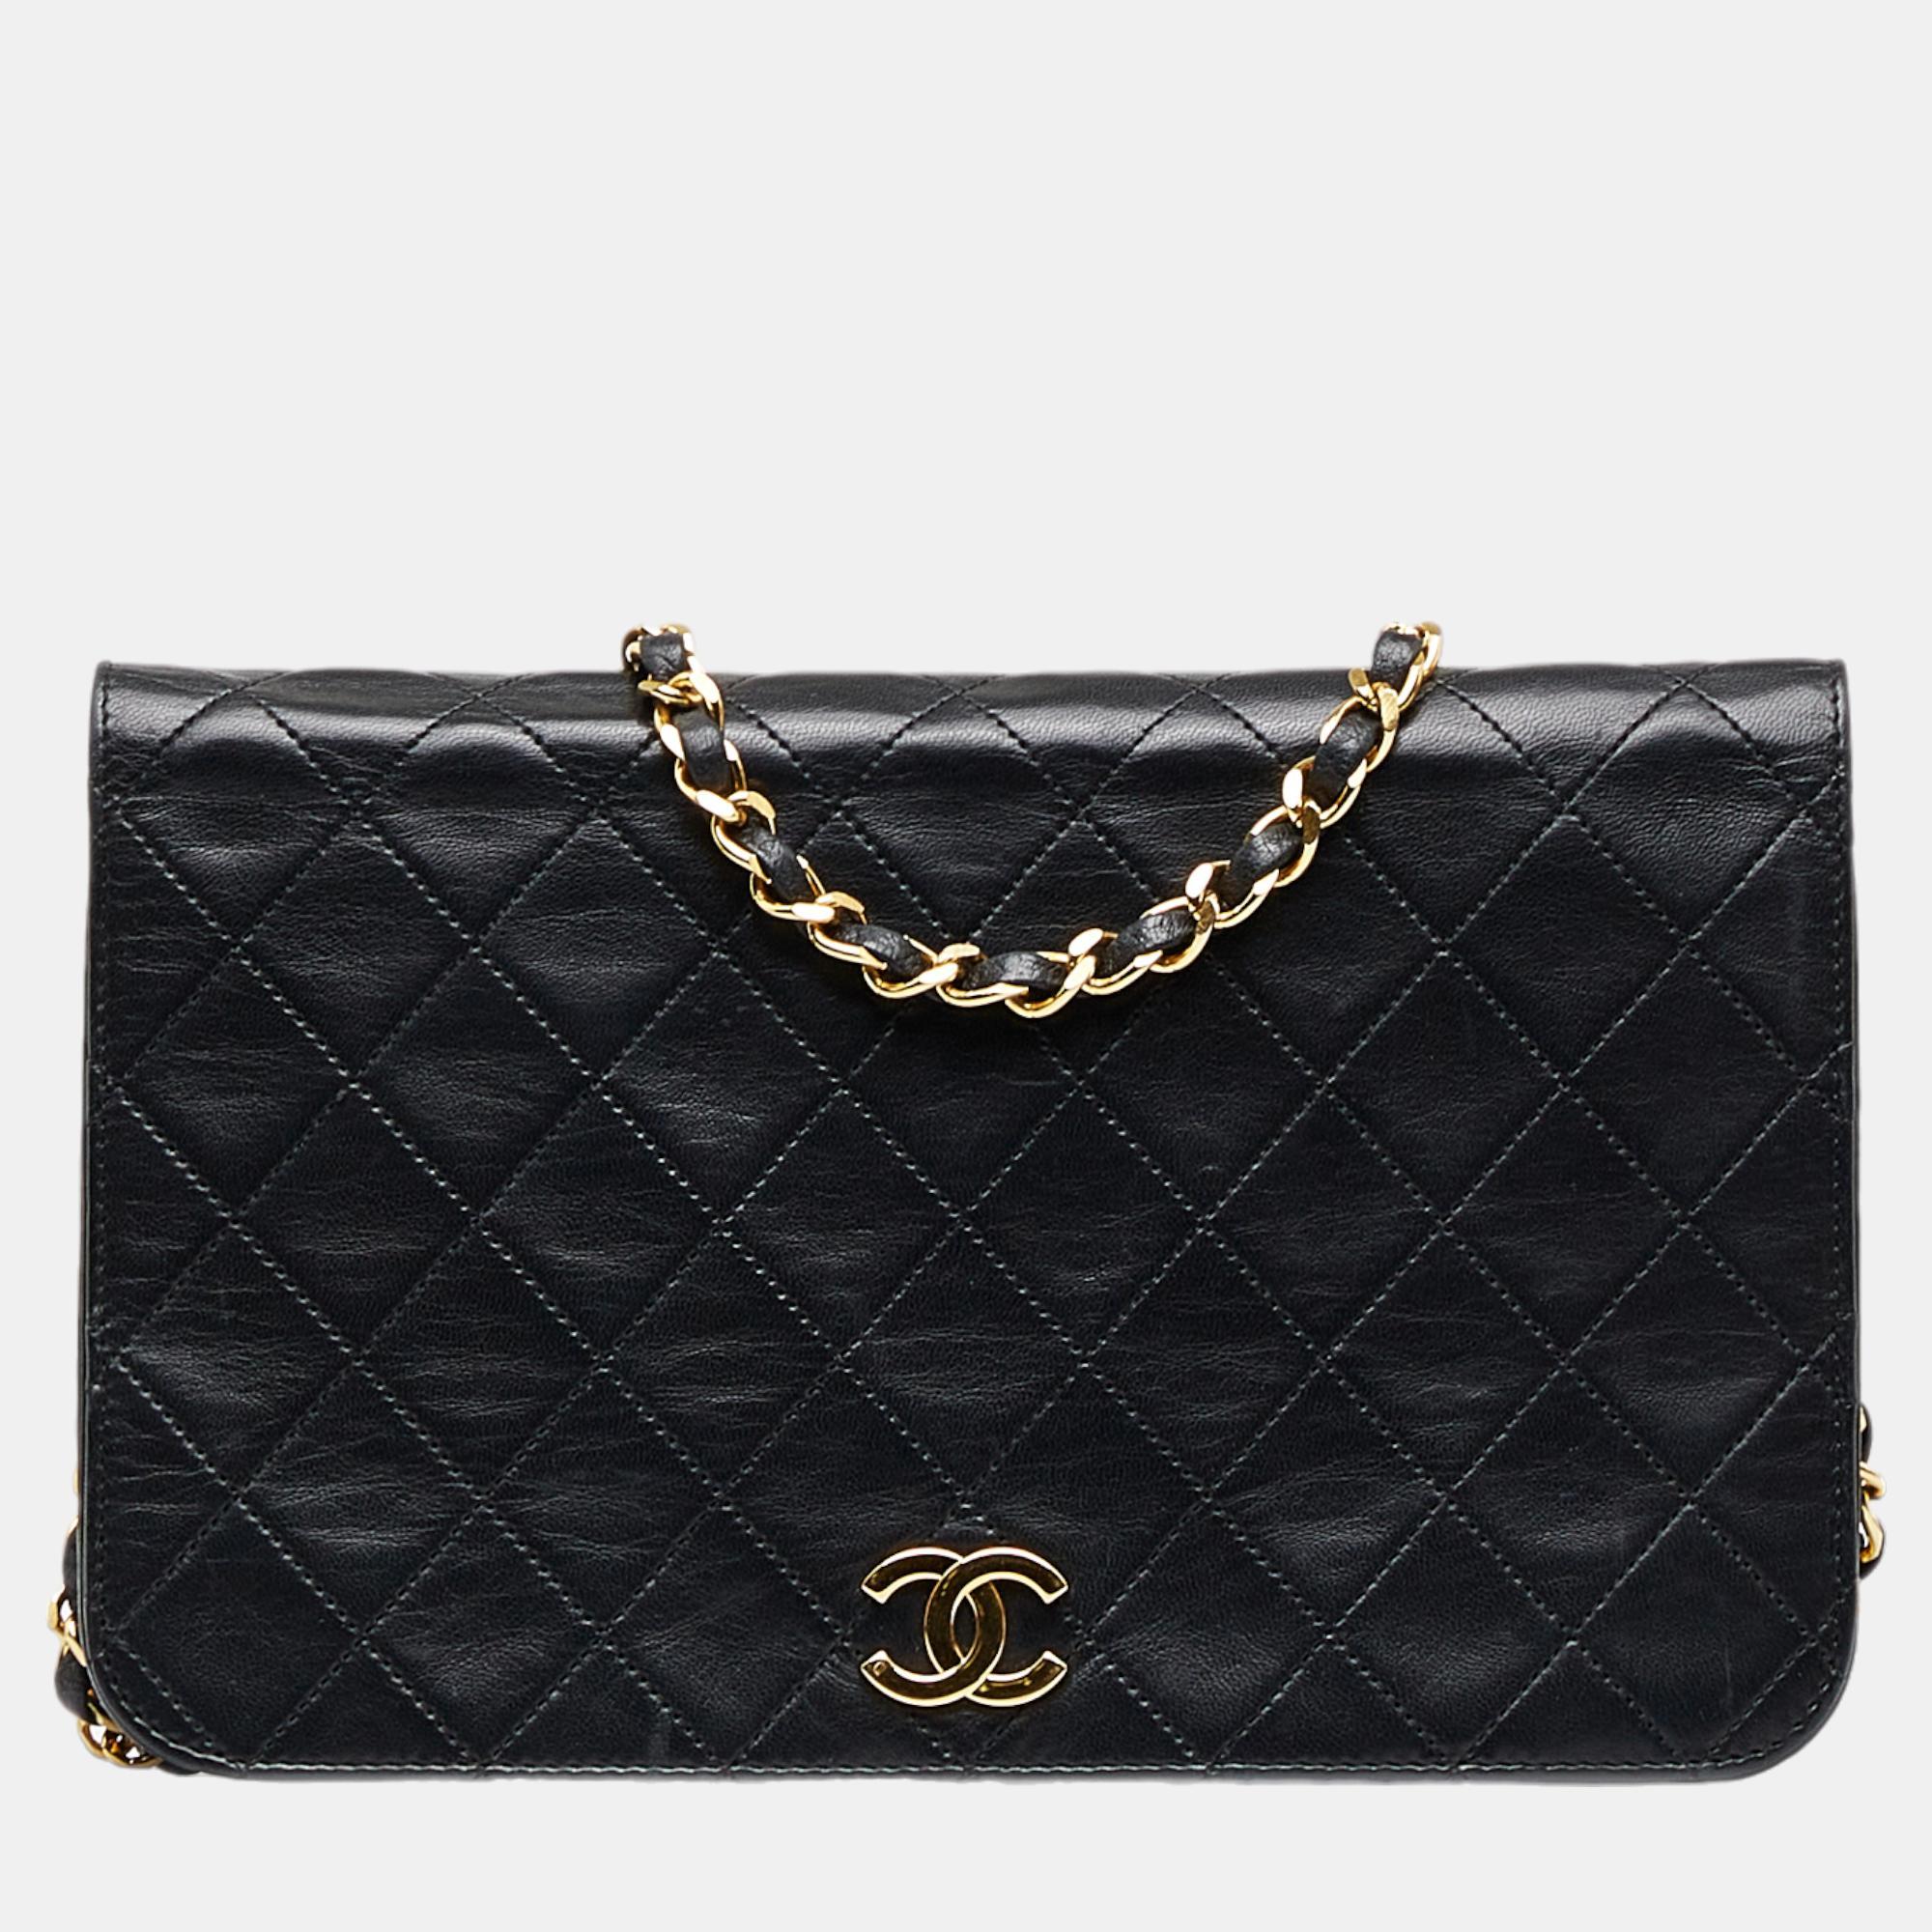 Chanel Black Small CC Quilted Full Flap Shoulder Bag